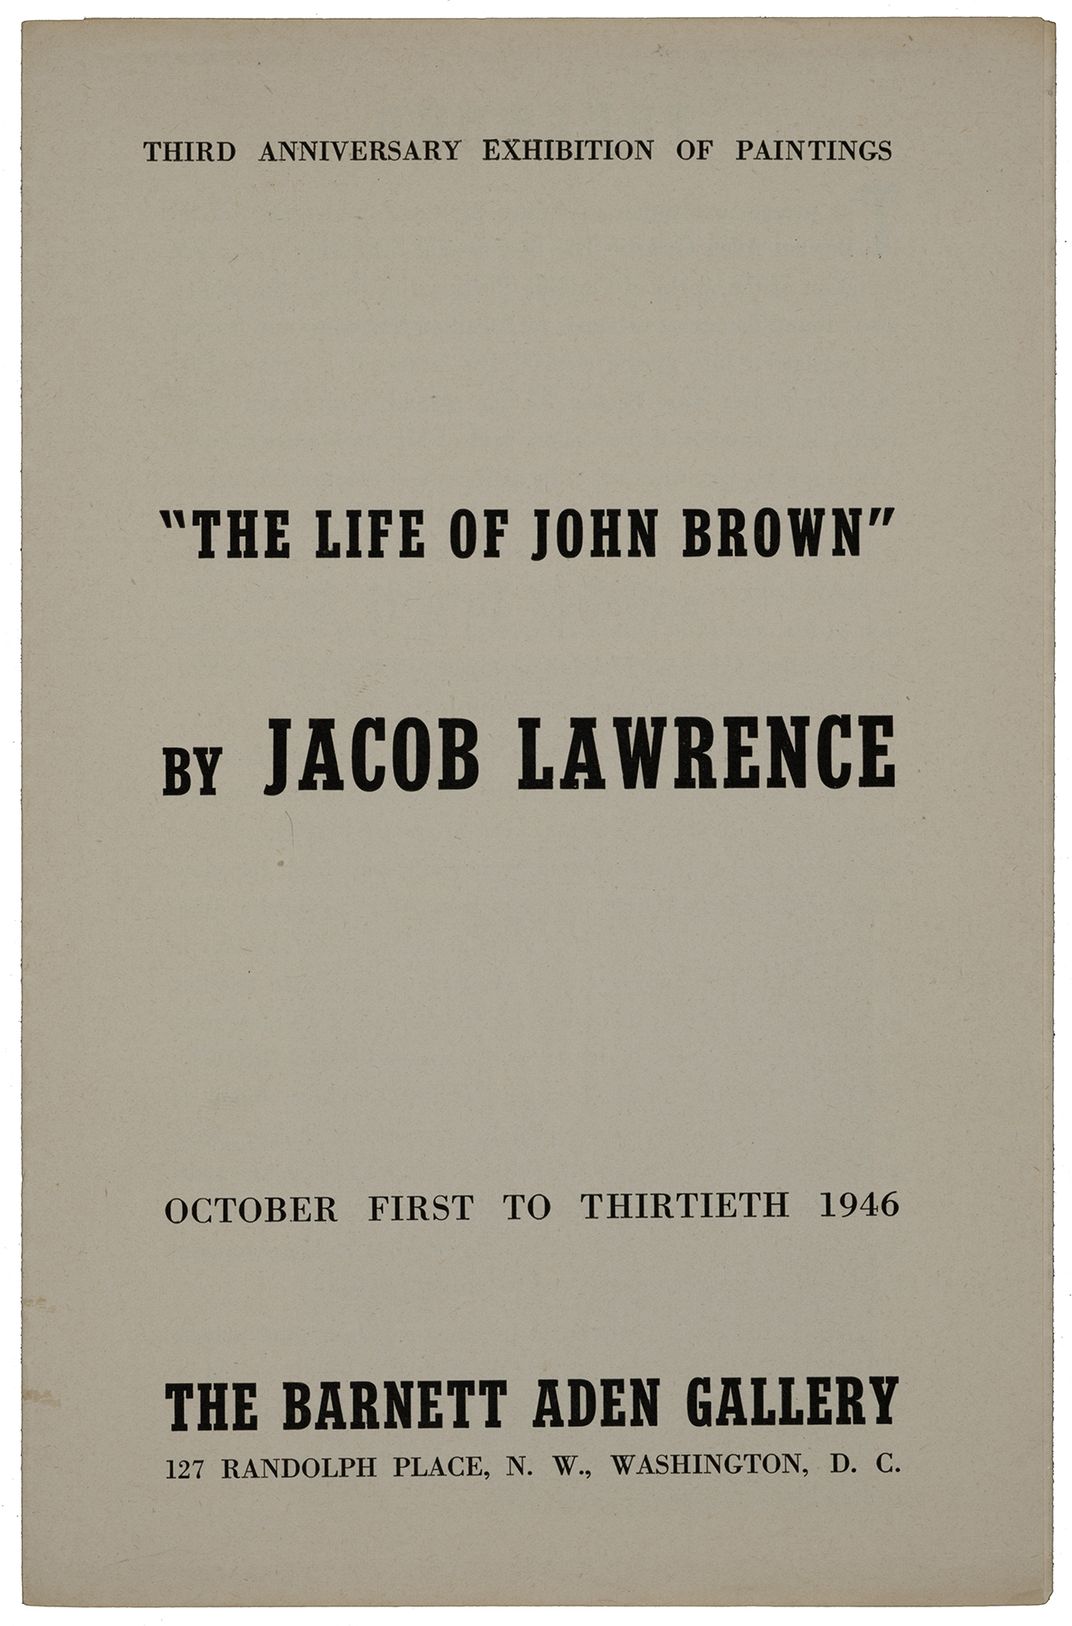 Exhibition catalog for "The Life of John Brown" by Jacob Lawrence